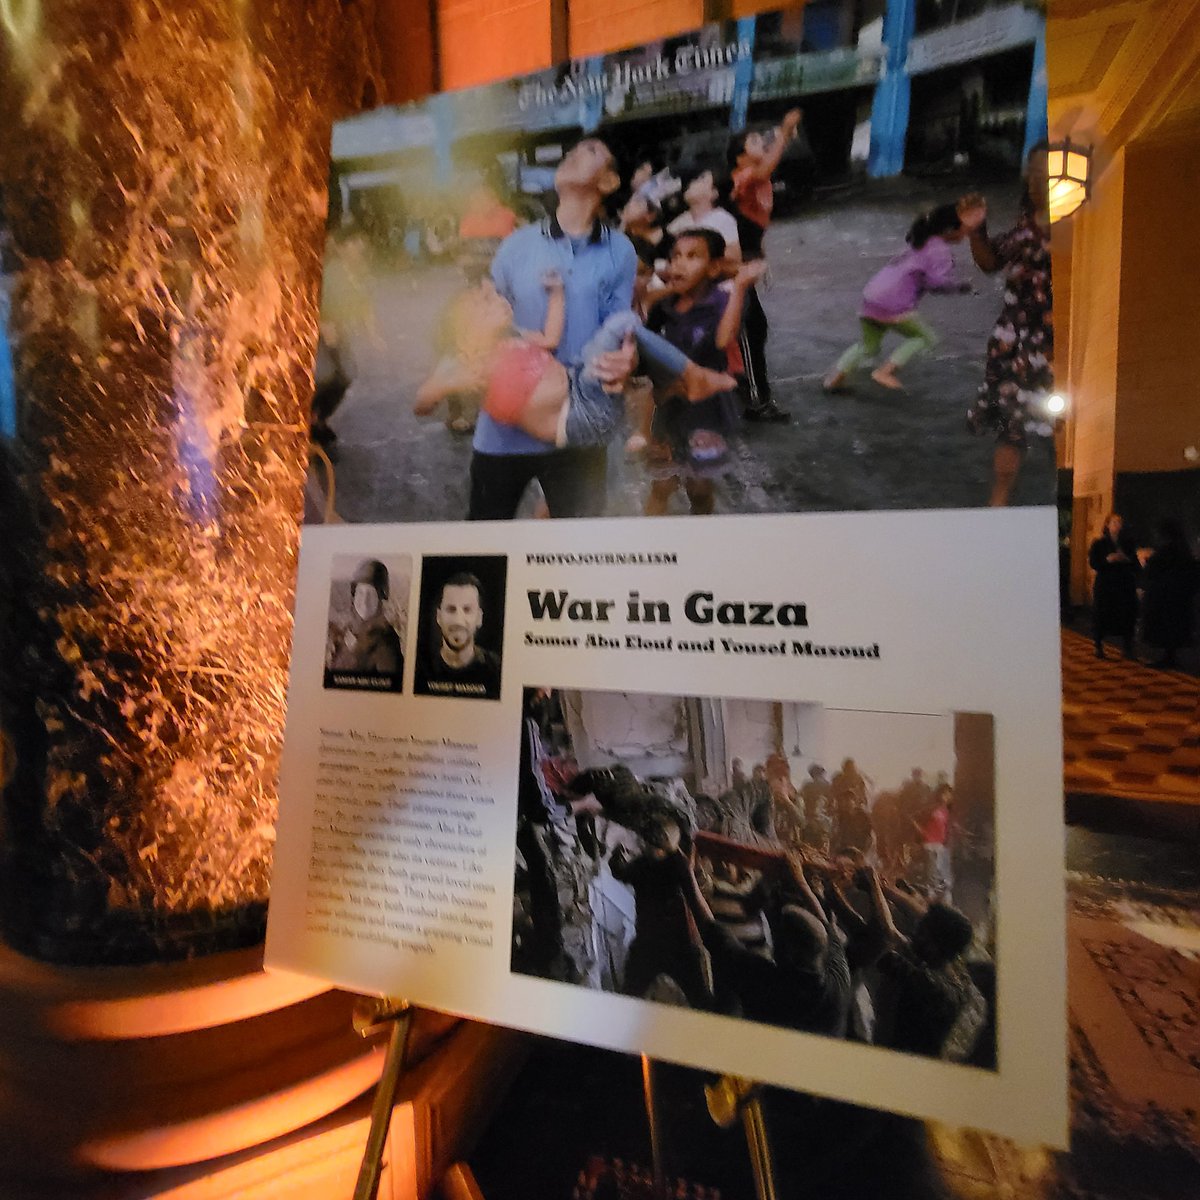 POLK award...Samar Elouf and Ypussef Masoud, for @nytimes photography in #Israel and #Gaza ..